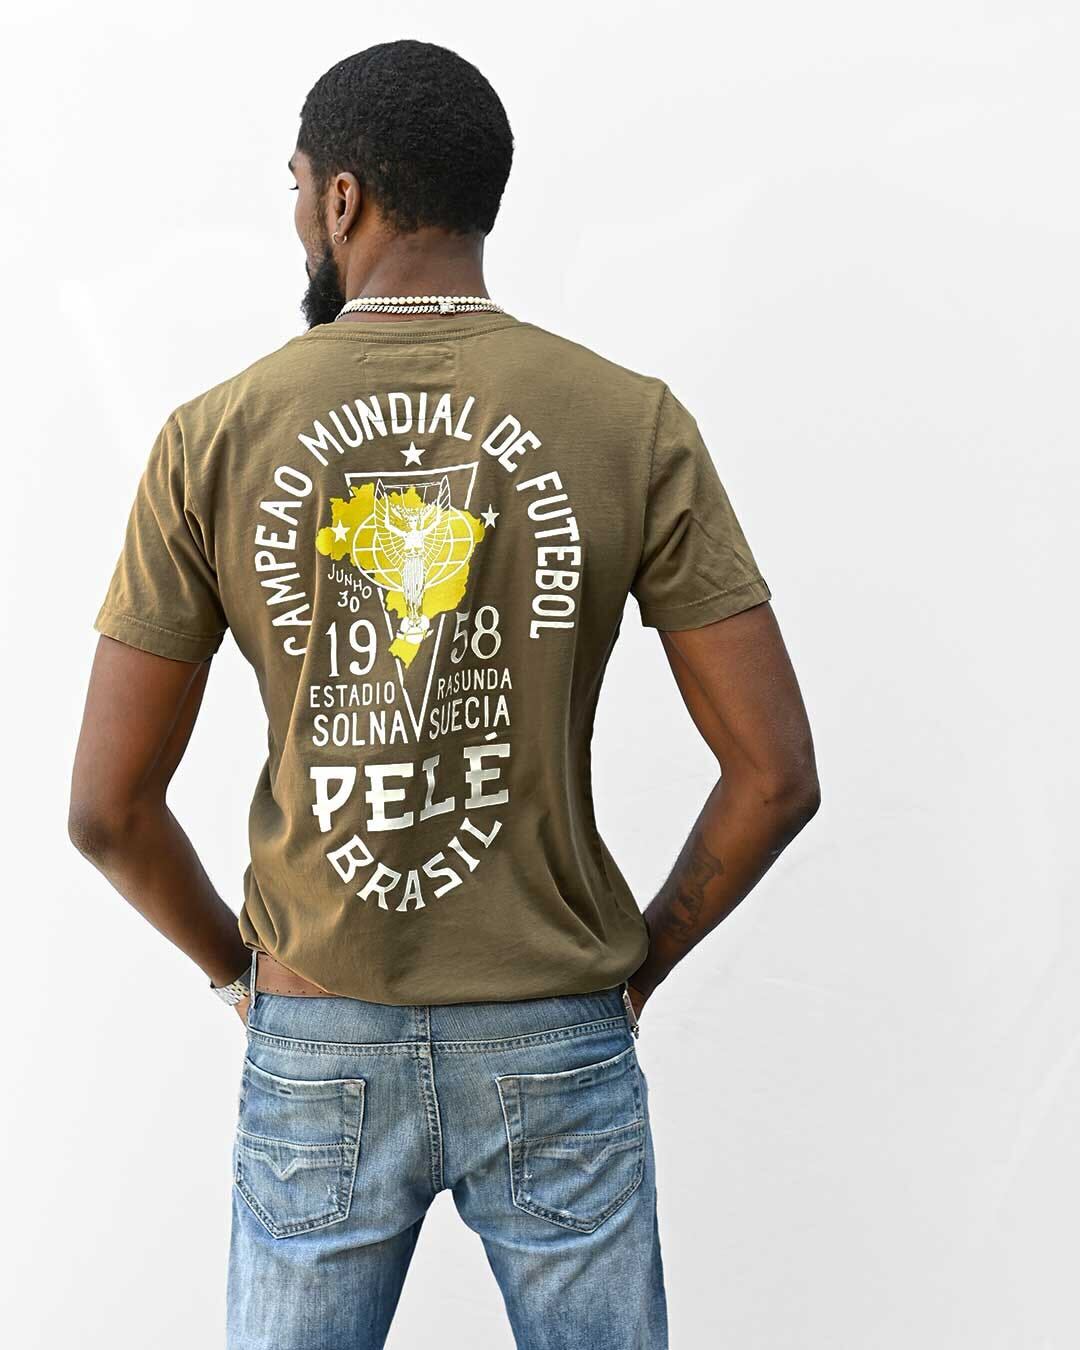 Pelé 1962 Photo Collage Tee - Roots of Fight